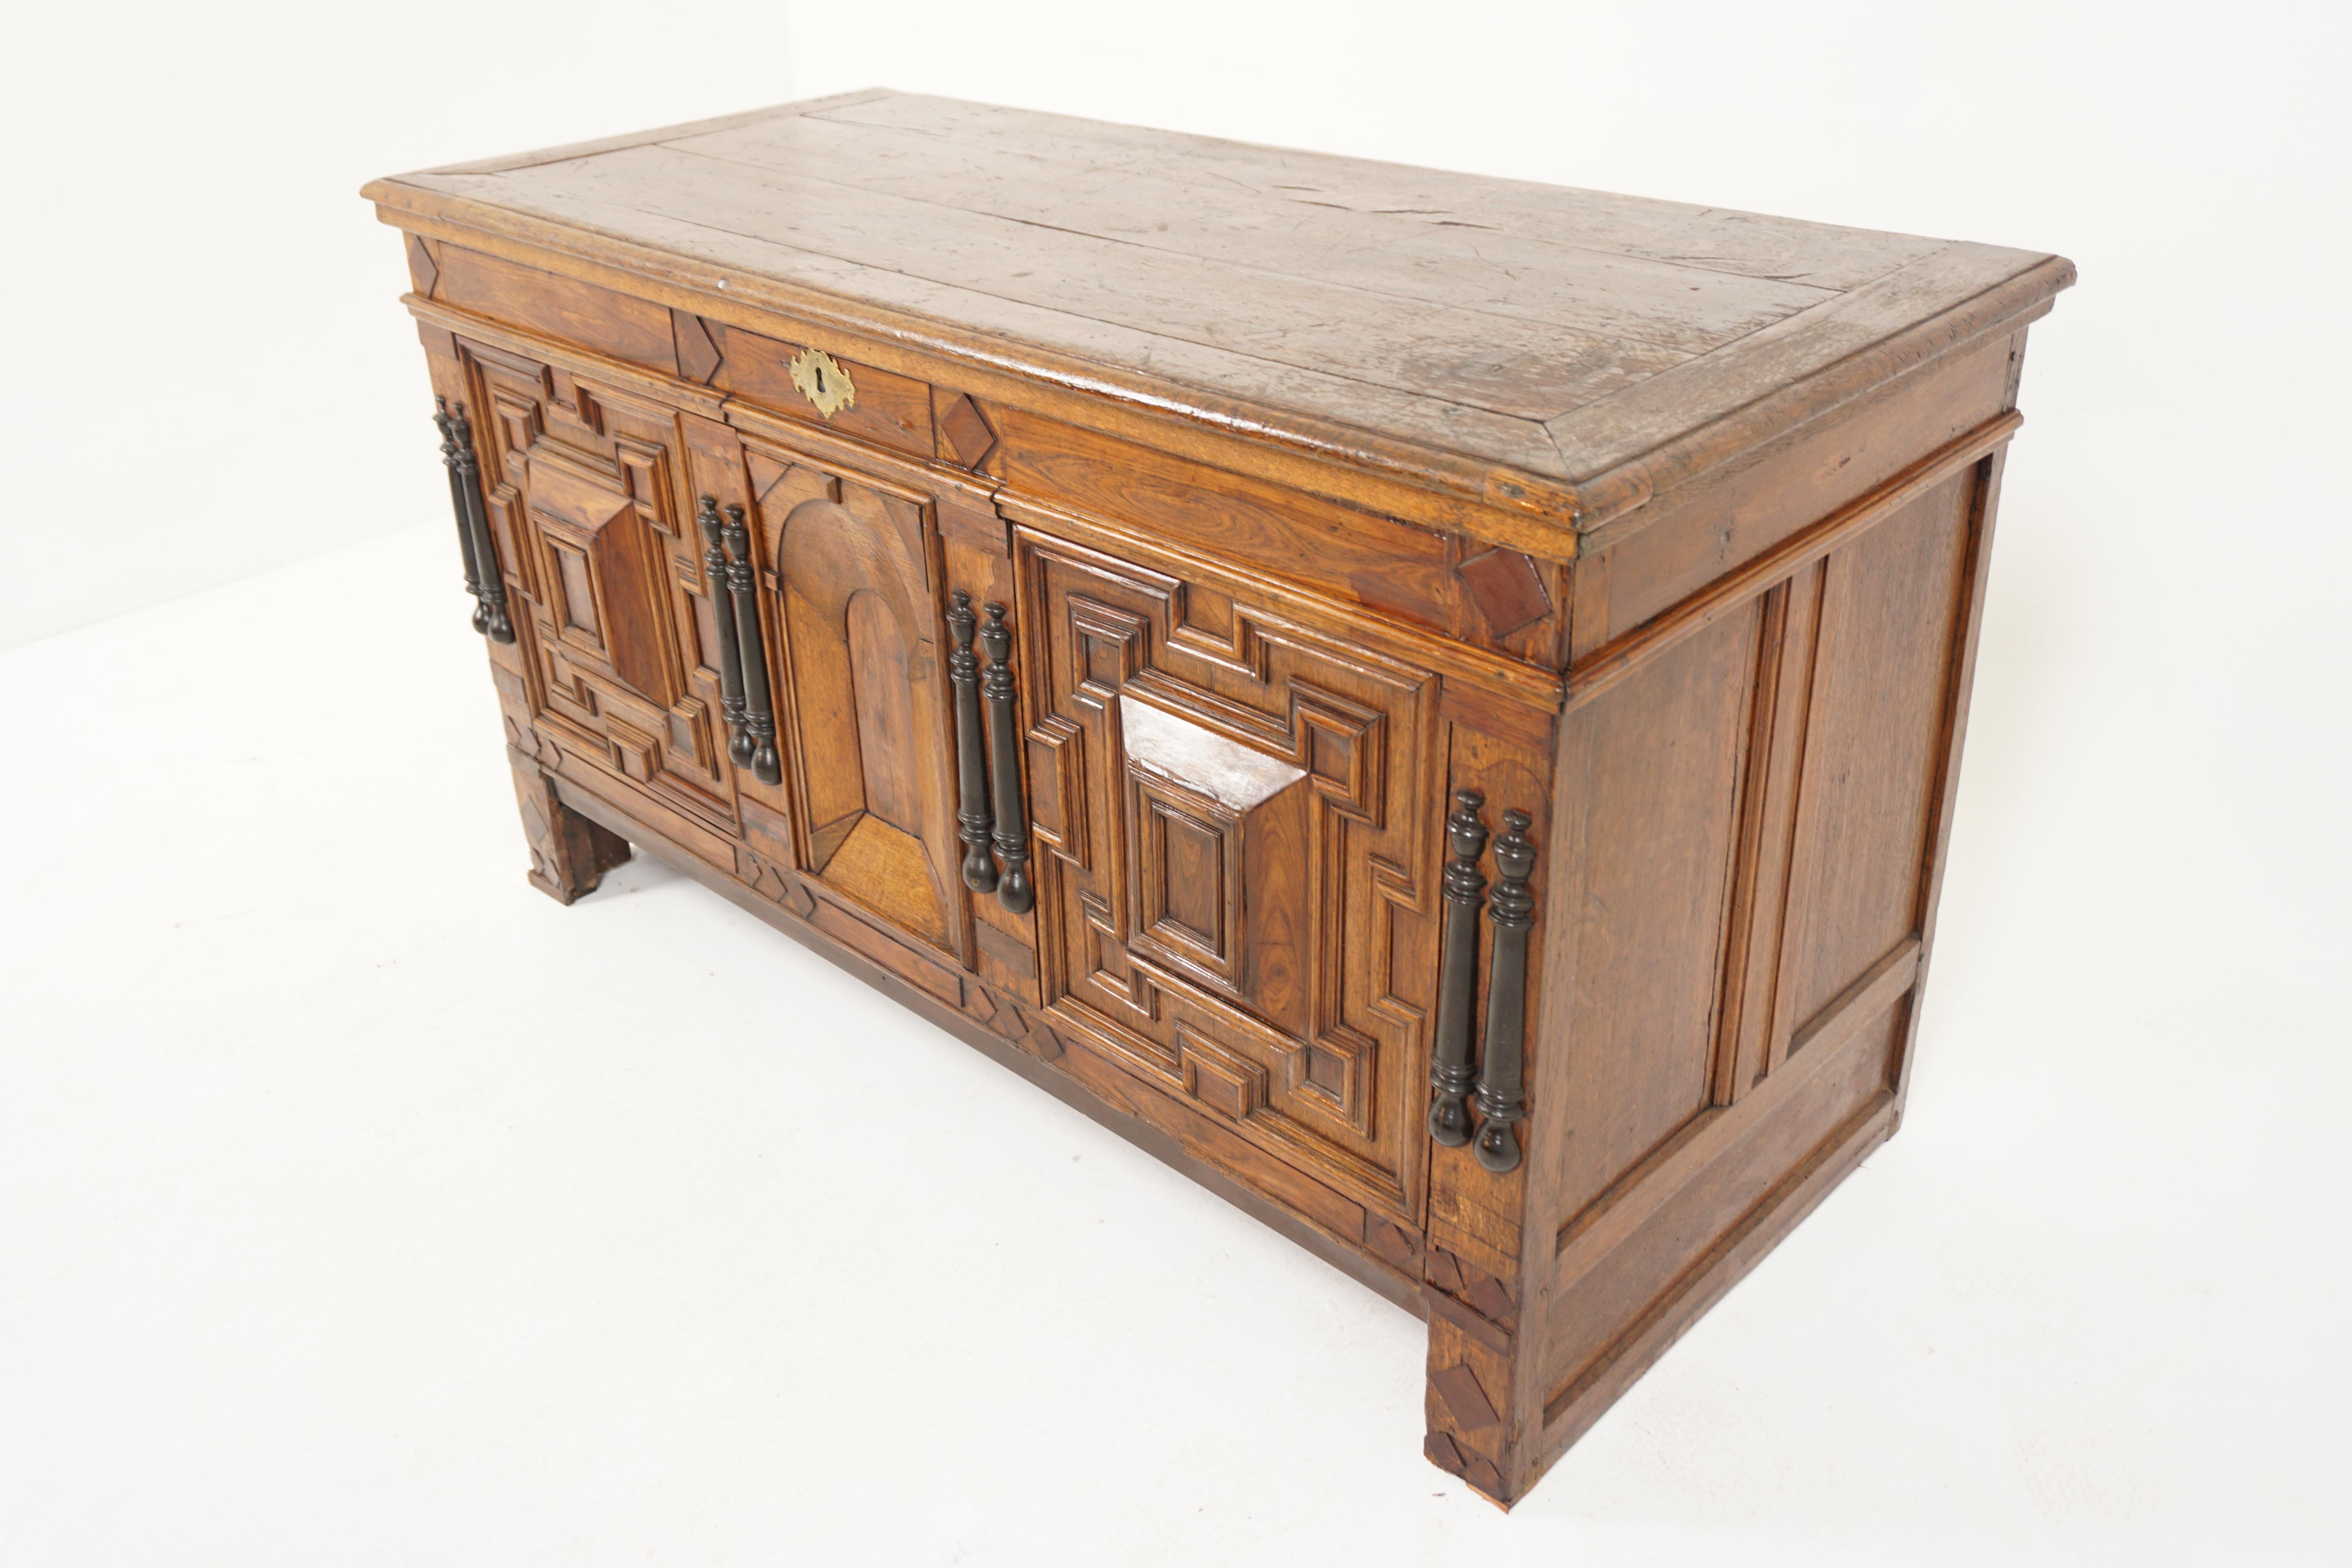 Antique carved oak Dutch trunk, dowry or blanket box, coffer, Holland 1790, H346

Holland 1790
Solid oak
Original finish
Rectangular moulded top
Lift up top
Opens to reveal large storage space
Three carved panels on the front
Brass escutcheon with